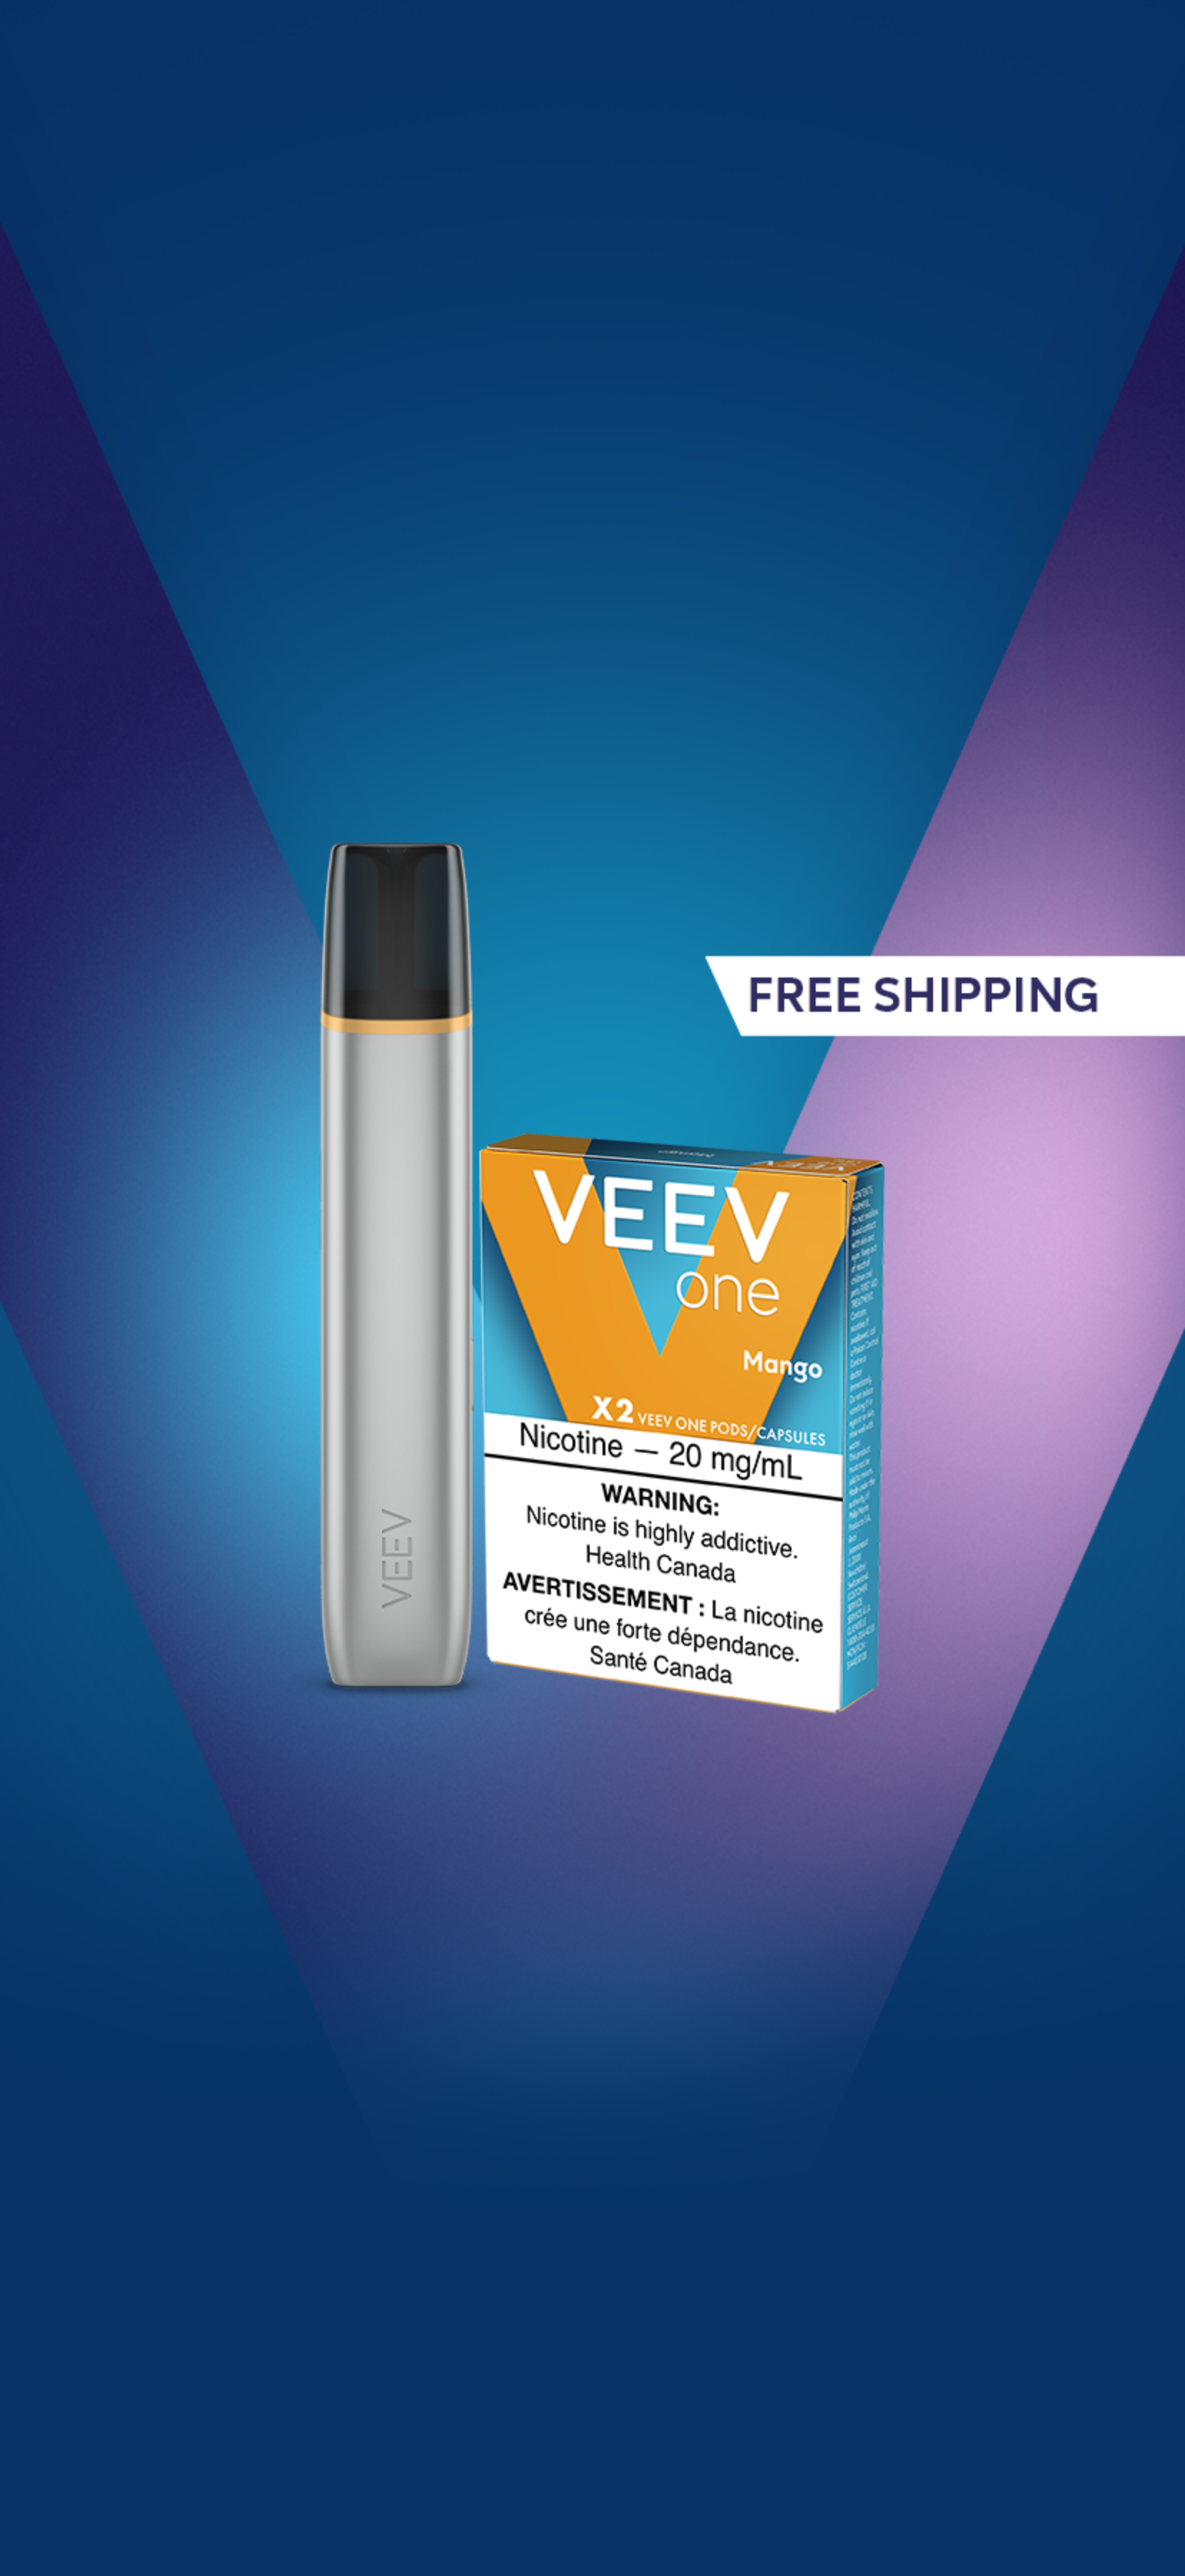 Free shipping! VEEV Flash Sale, 1 vape + 1 pack of pods.